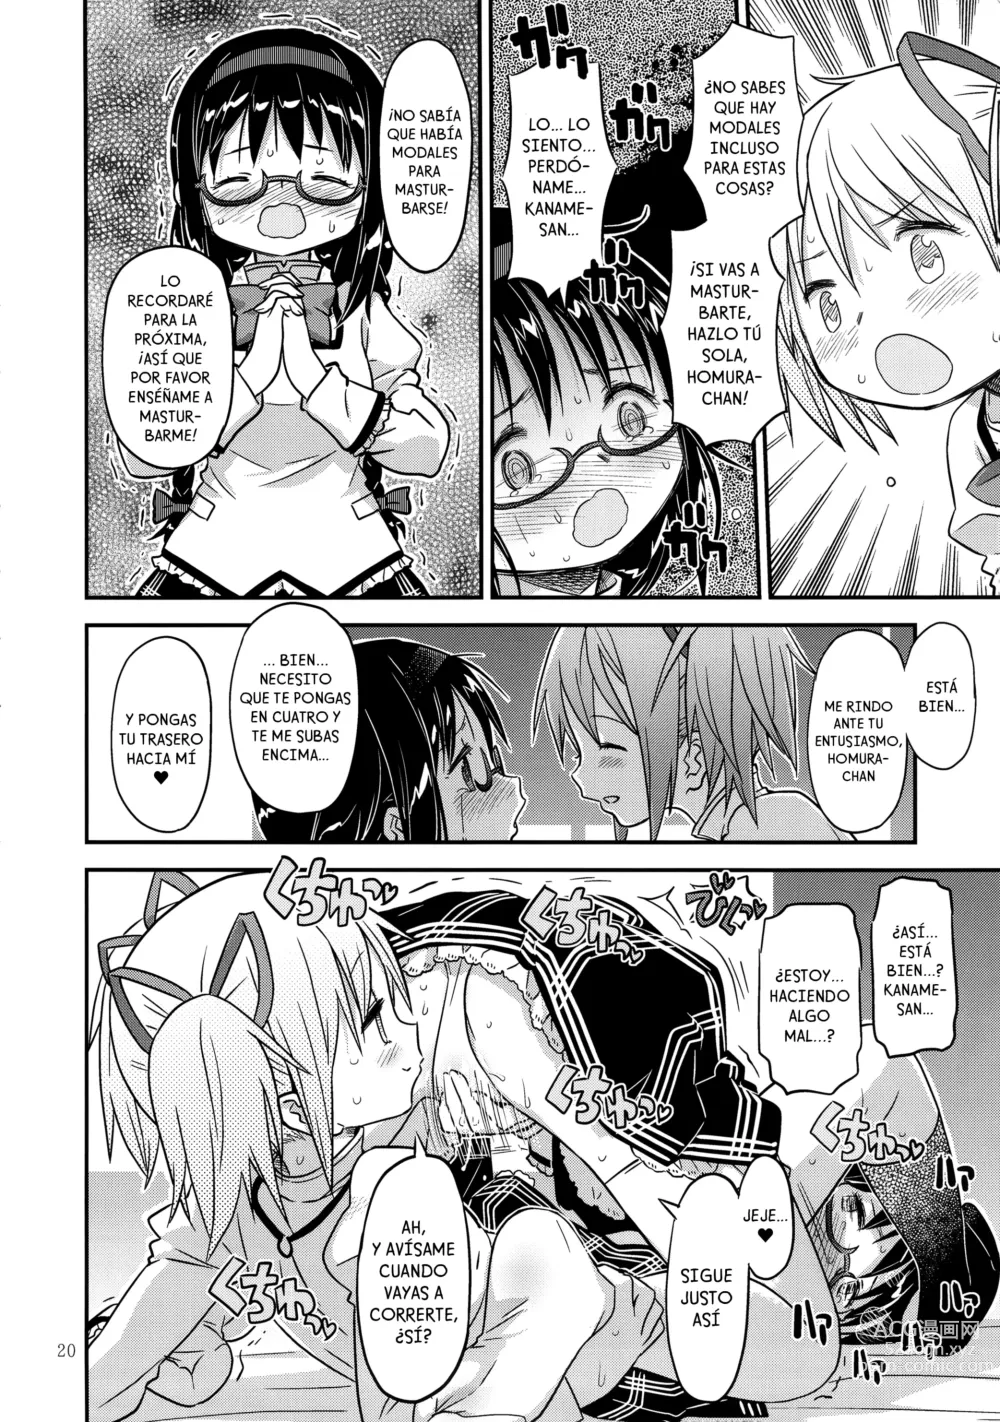 Page 19 of doujinshi Its Time to Fall?